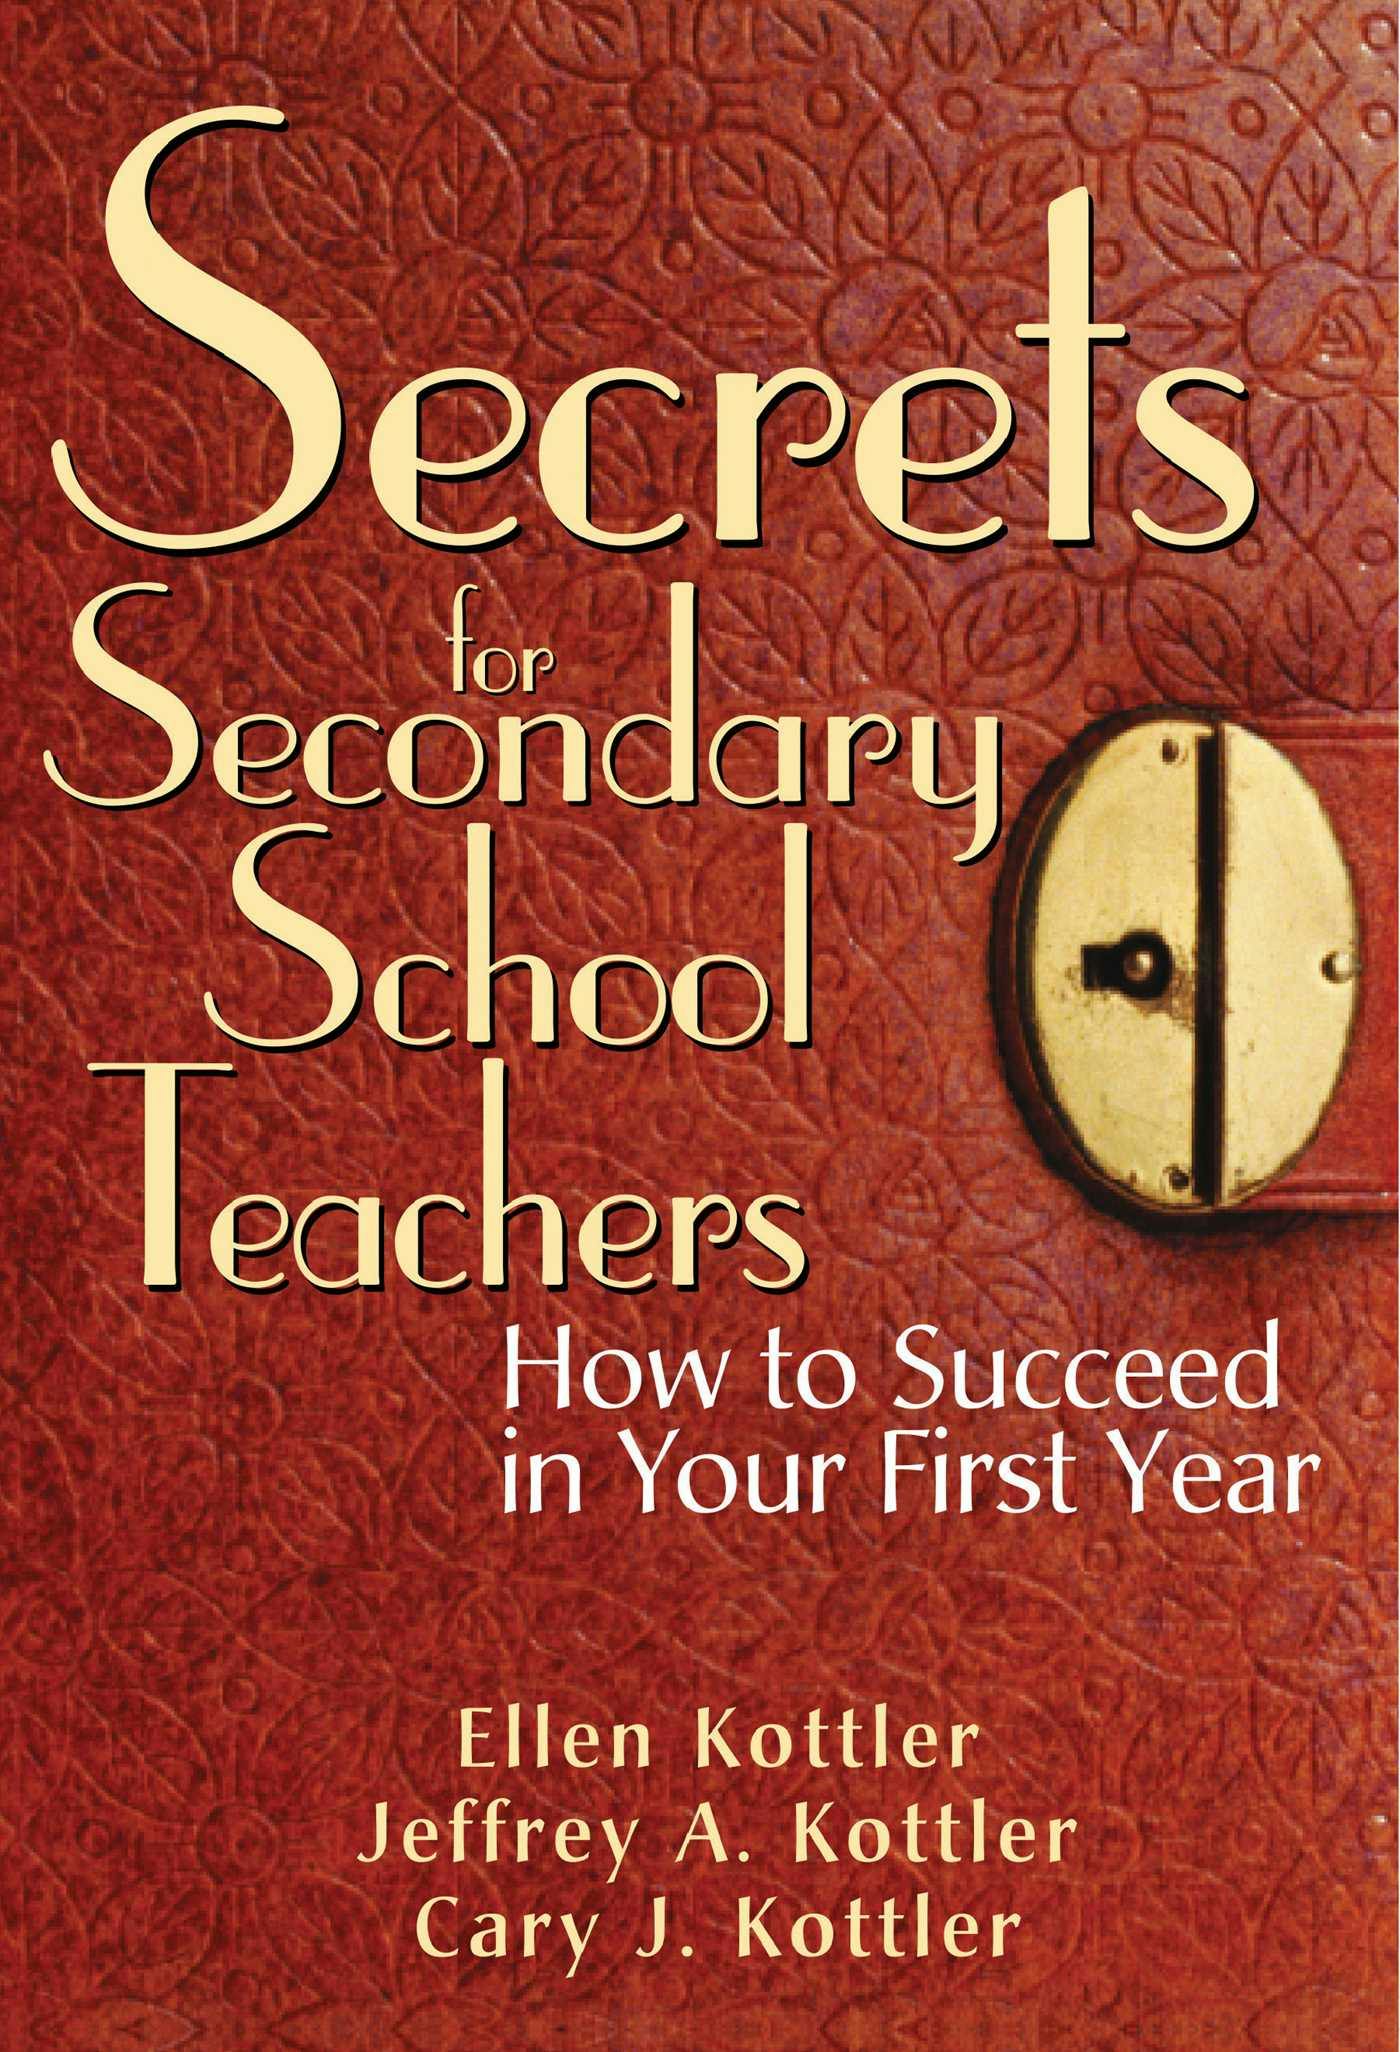 Secrets for Secondary School Teachers: How to Succeed in Your First Year - undefined